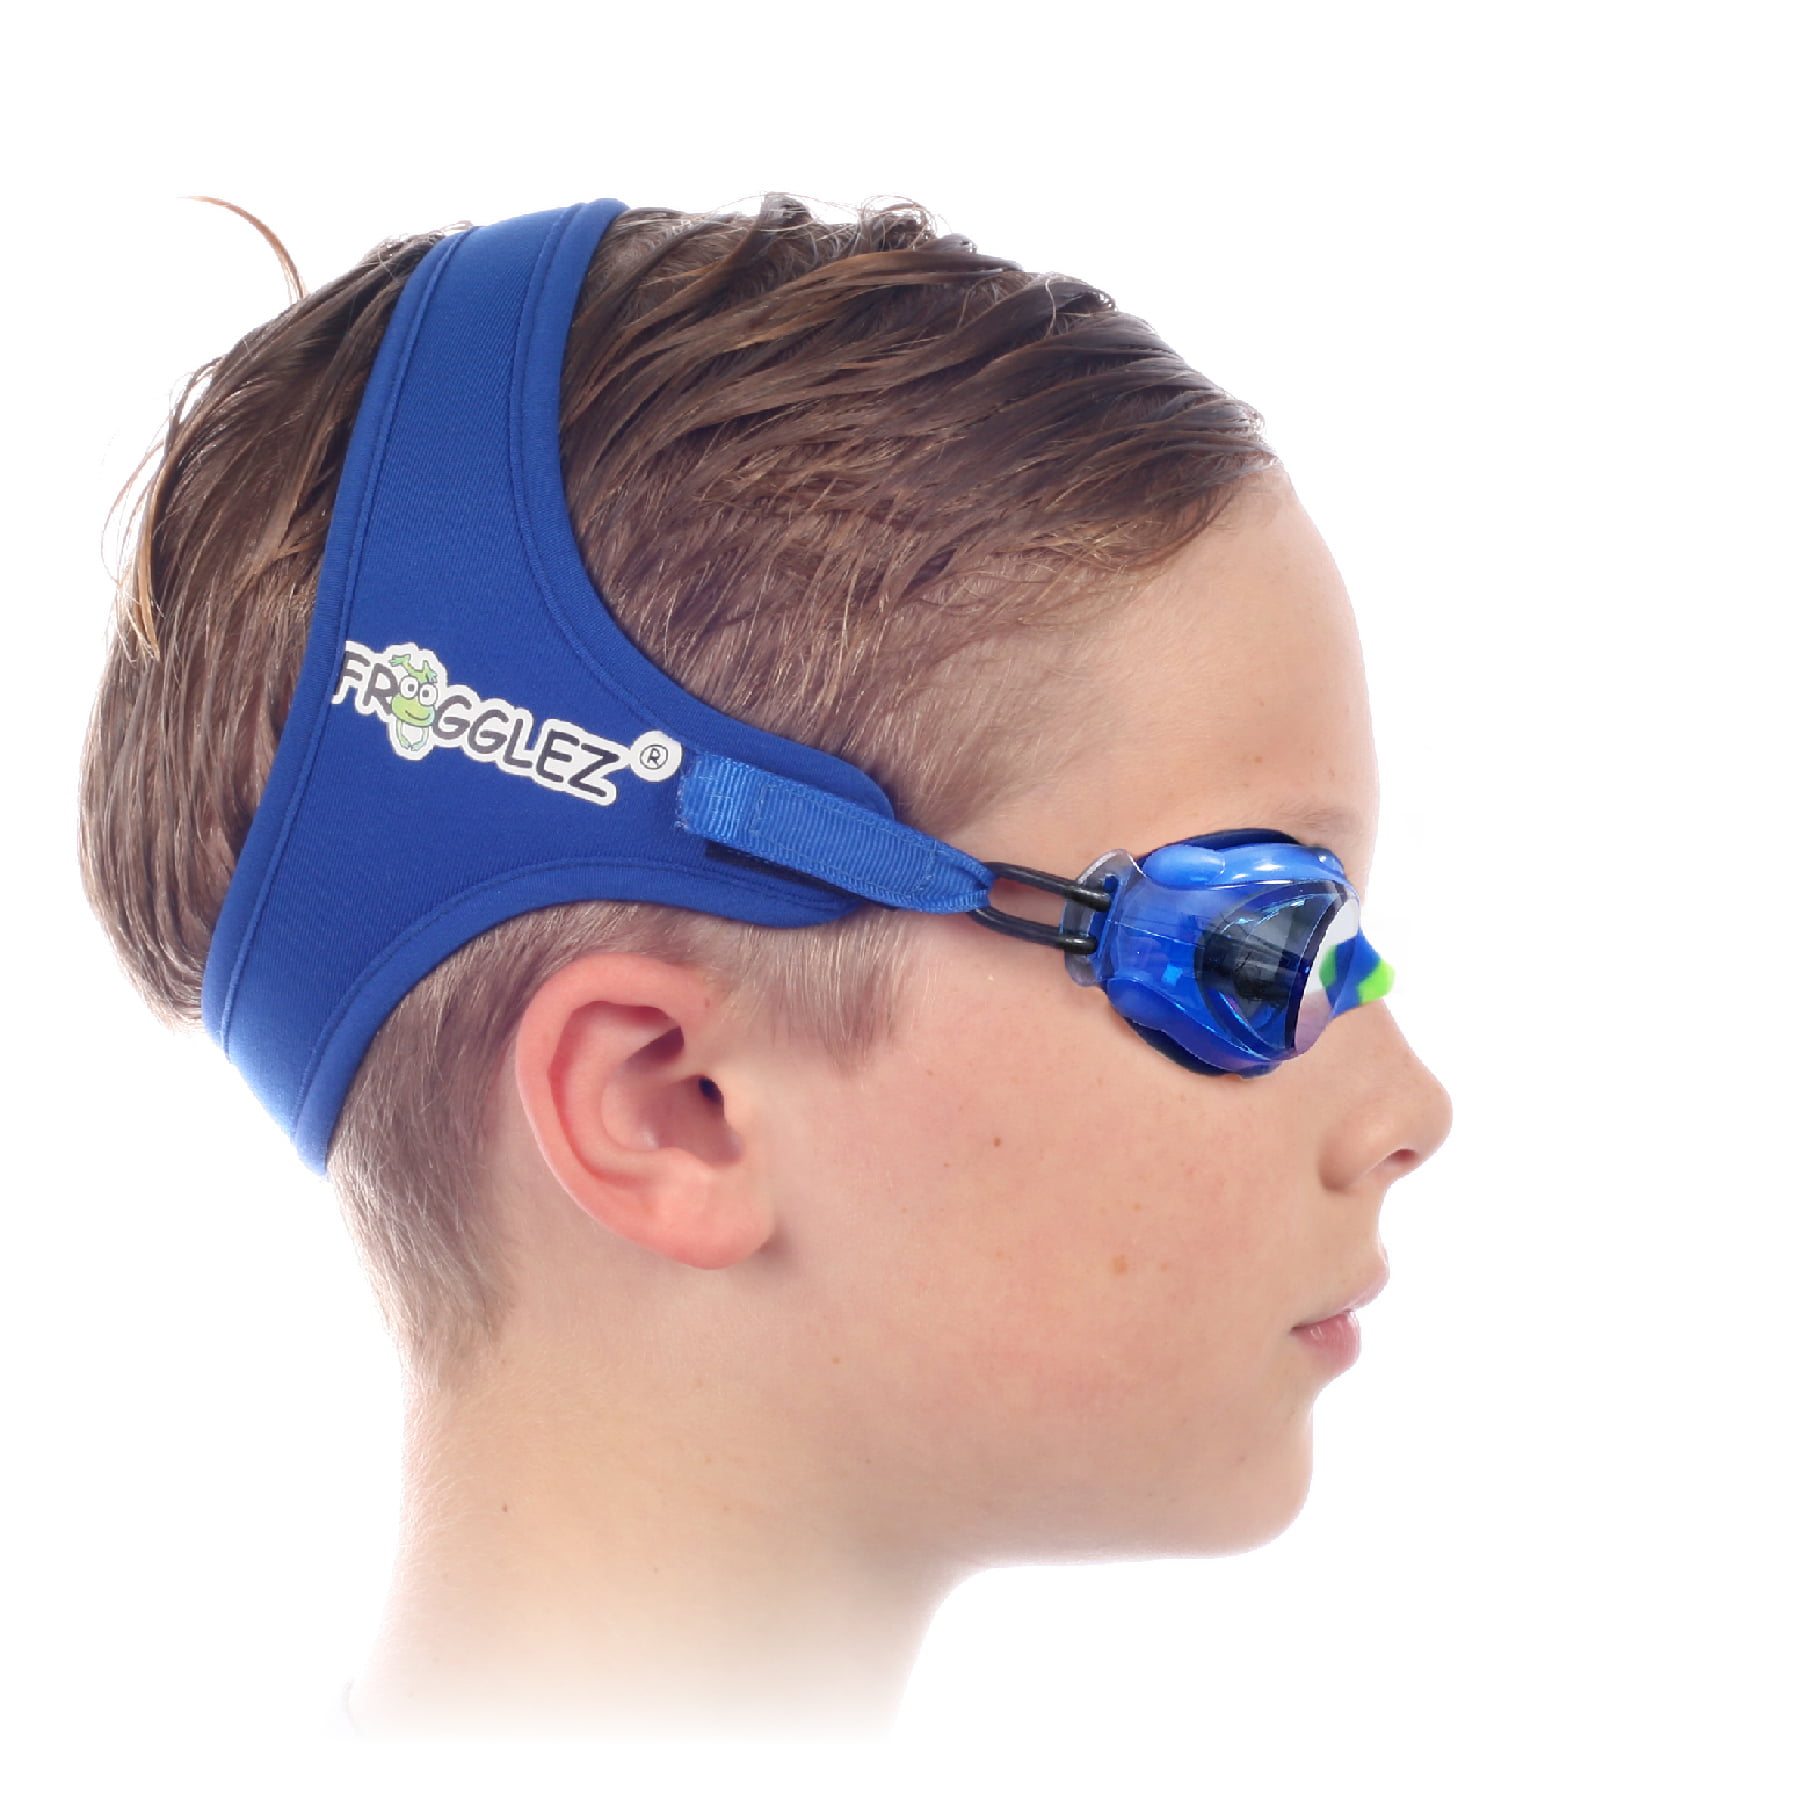 Recommended by Olympic Swimmers 10 in Swimming Lessons UV Protection No Hair Pulling Ideal for Ages 3 Leakproof Frogglez Kids Swim Goggles with Pain-Free Strap 